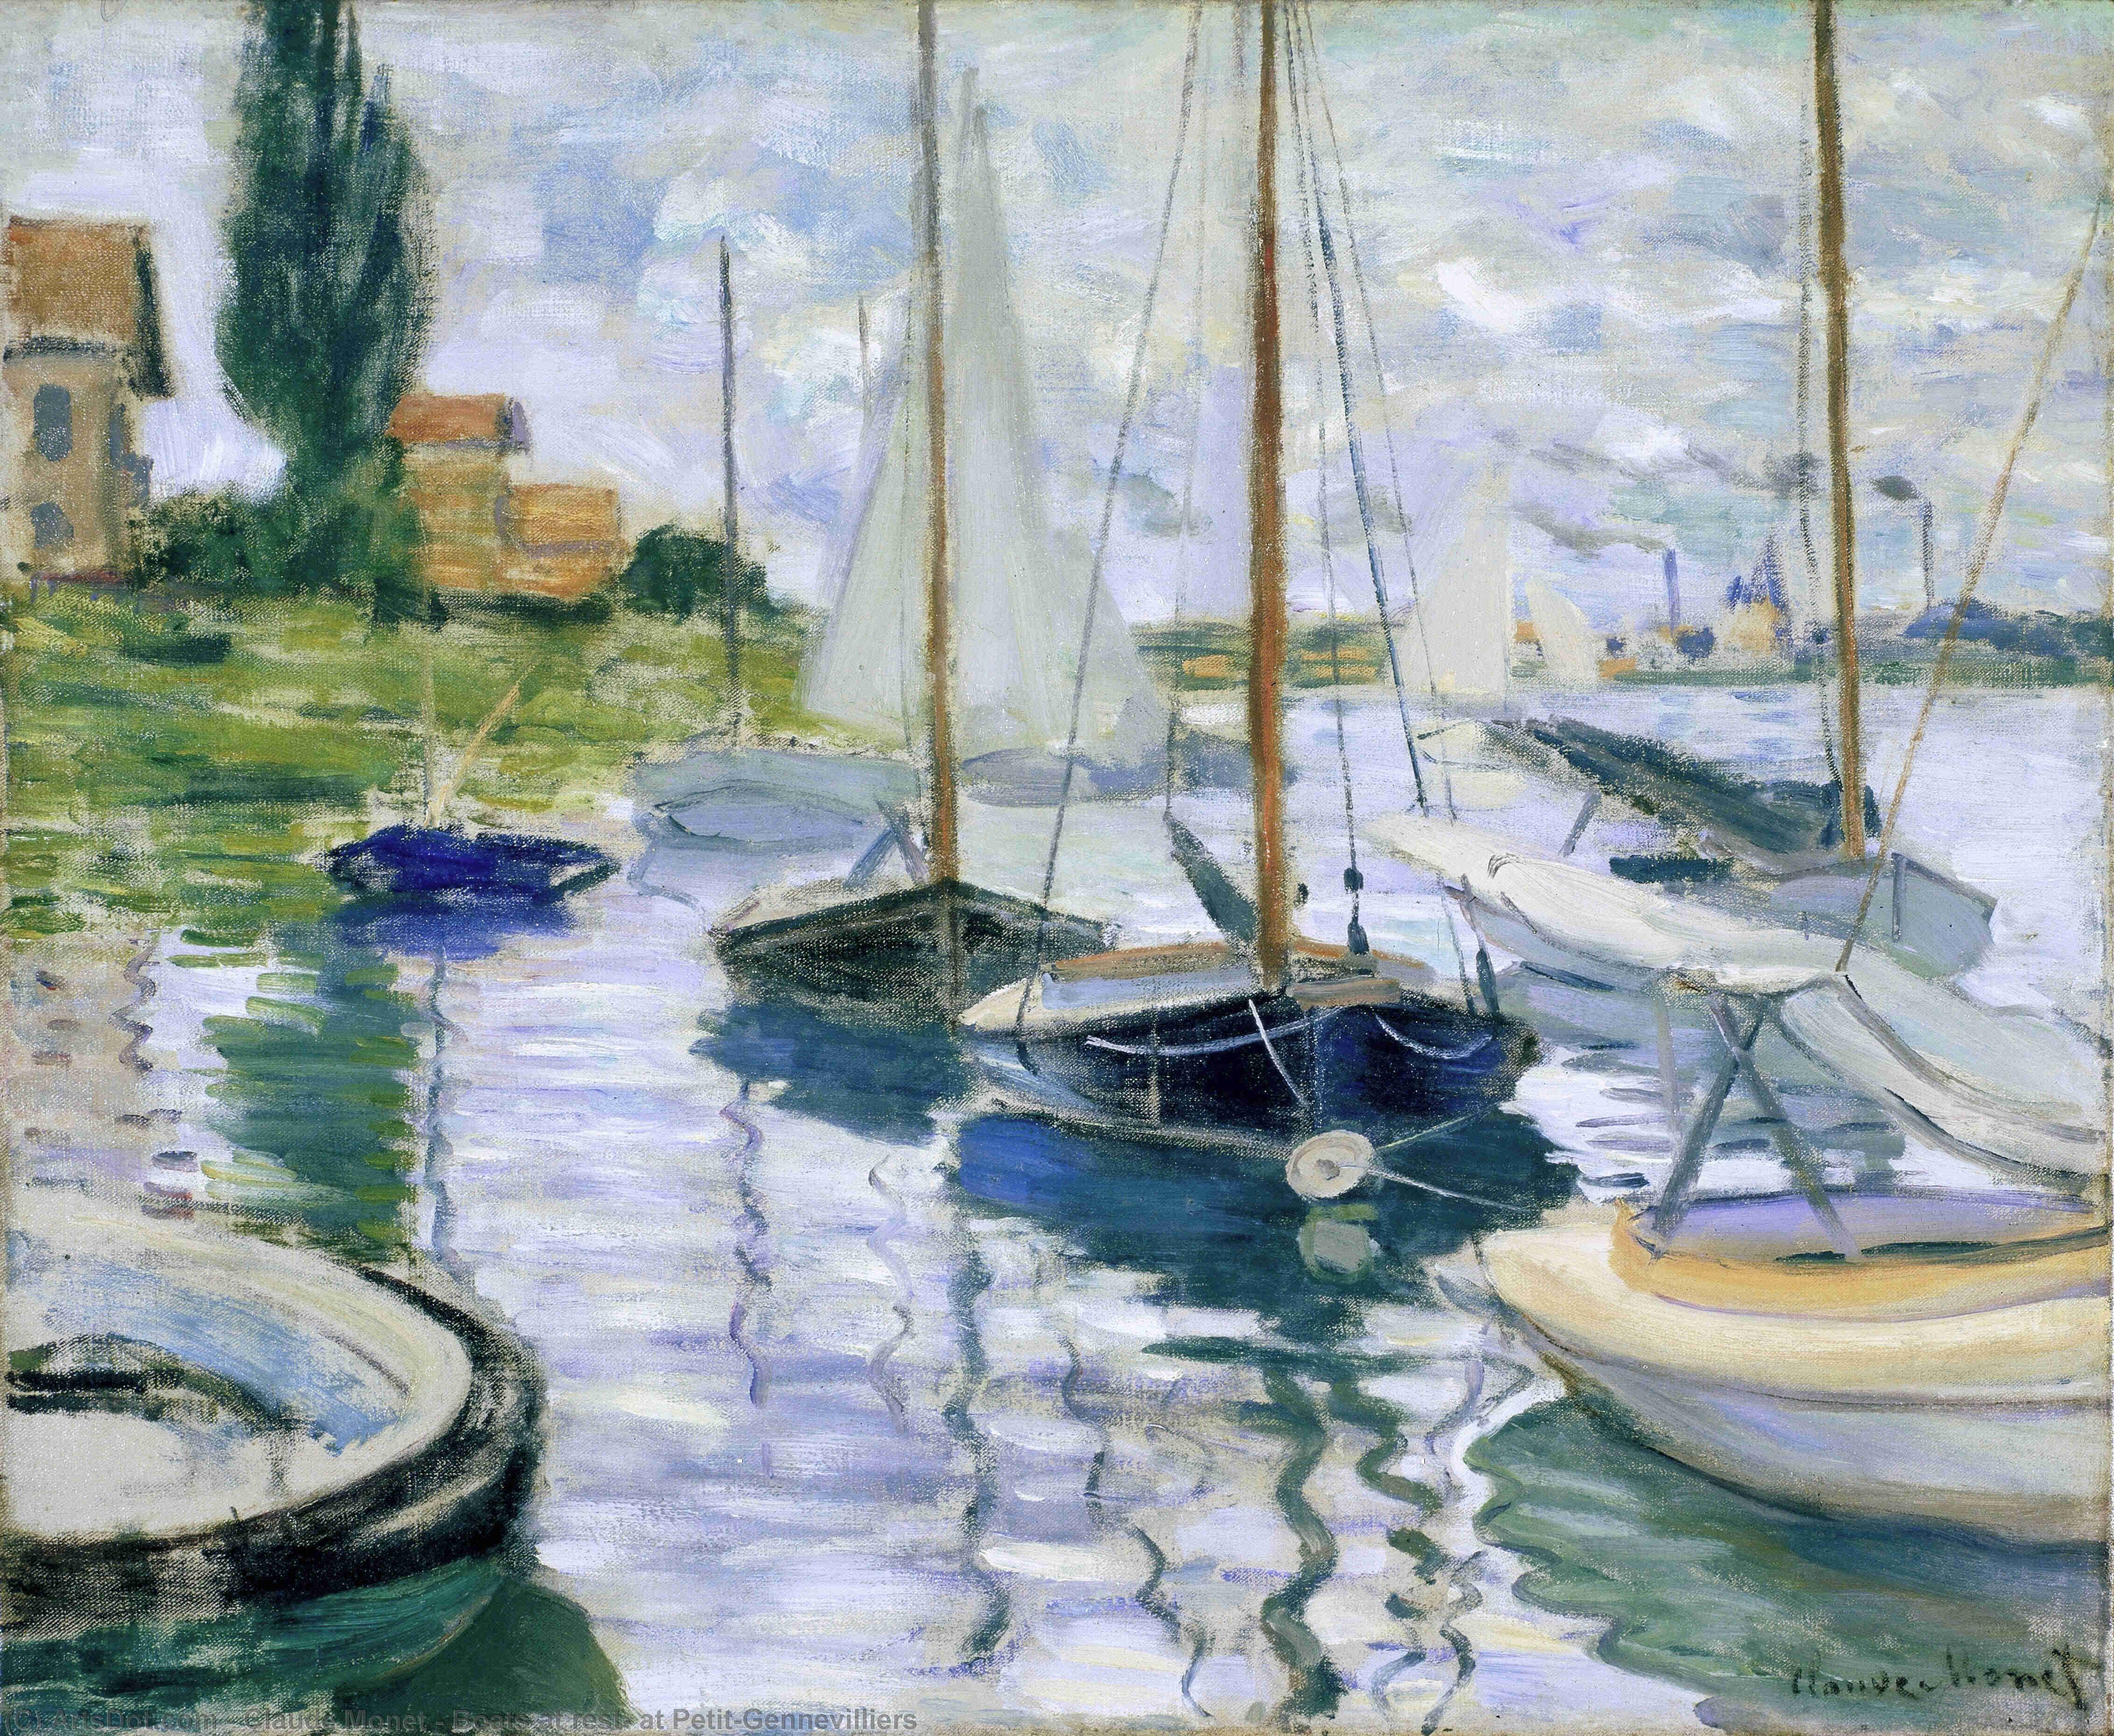 WikiOO.org - 백과 사전 - 회화, 삽화 Claude Monet - Boats at rest, at Petit-Gennevilliers